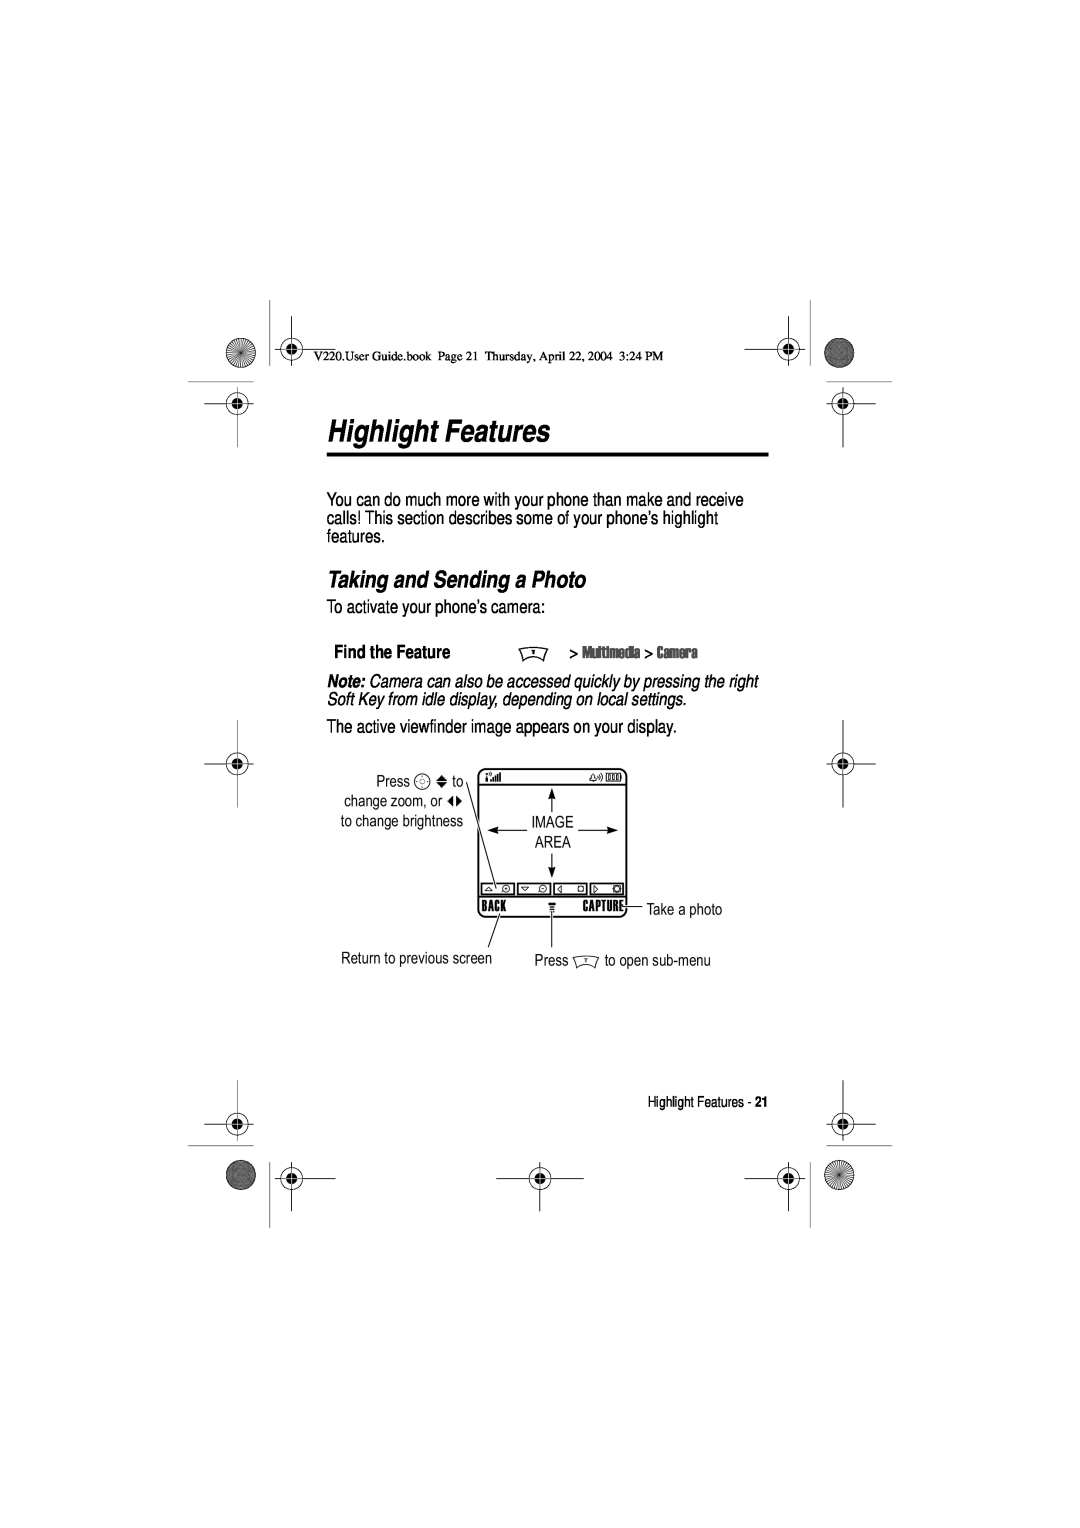 Motorola V220 manual Highlight Features, Taking and Sending a Photo 